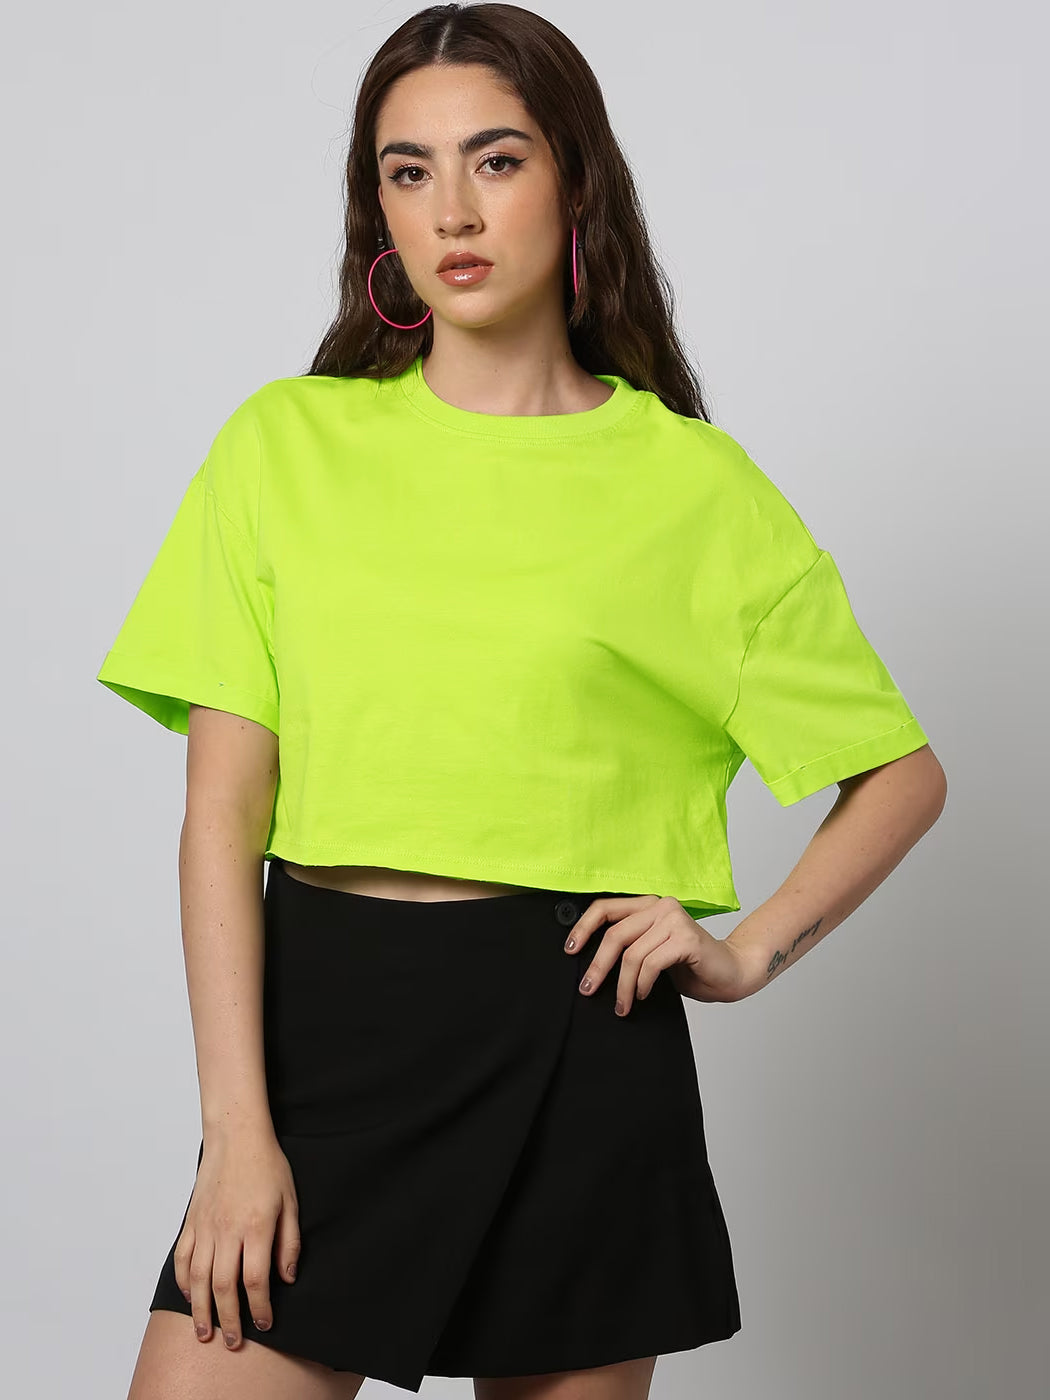 Popular Sports Viscose Crew Neck Crop Top For Women-Lime Green-BE1258